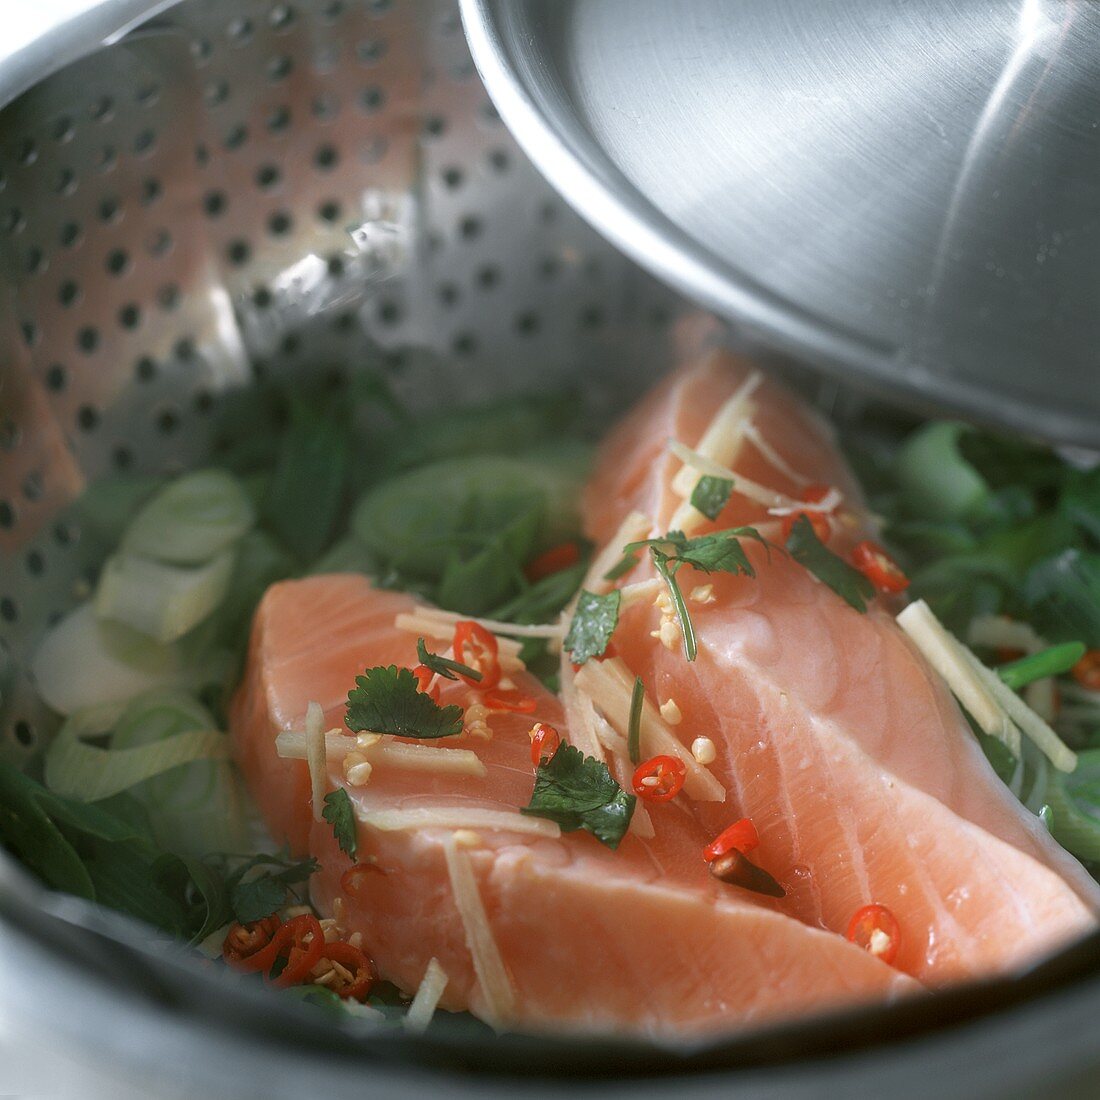 Steaming tuna & vegetables in steaming pan with strainer insert